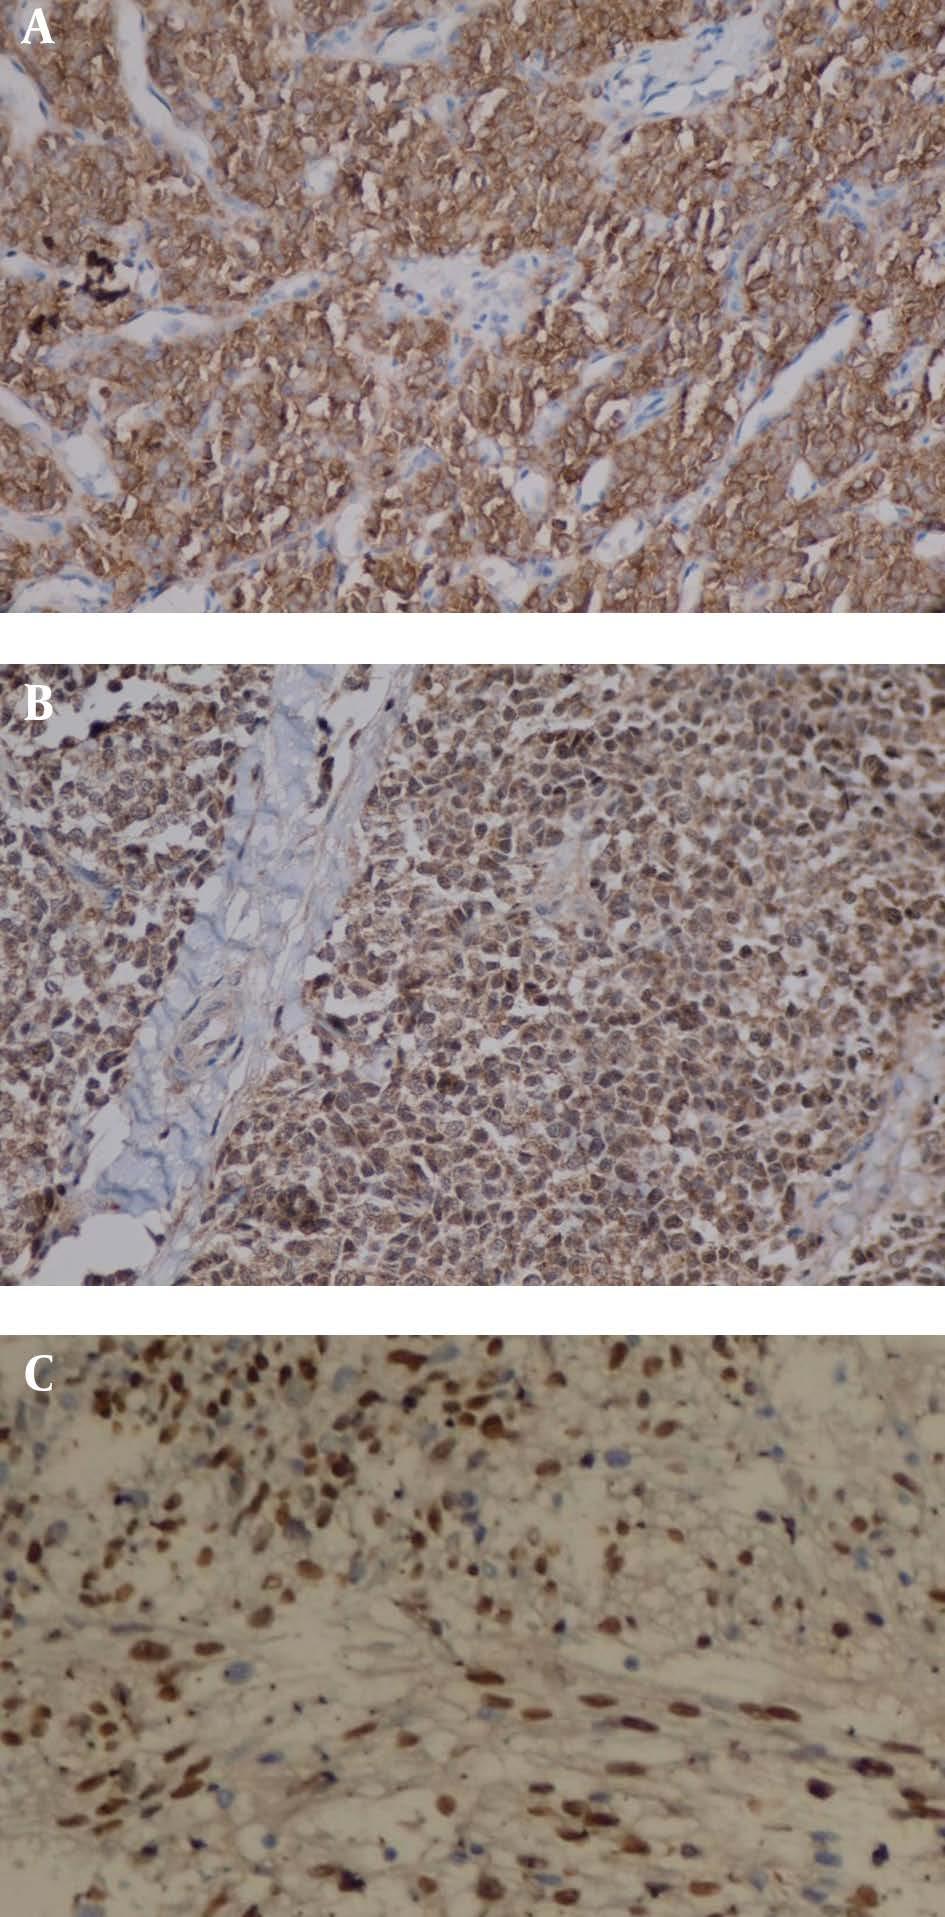 4.3. Immunohistochemical Analysis The IHC staining results for sinonasal tumors are presented in Table 2 and patterns of expression were shown in Figure 2 A-C Figure 2.